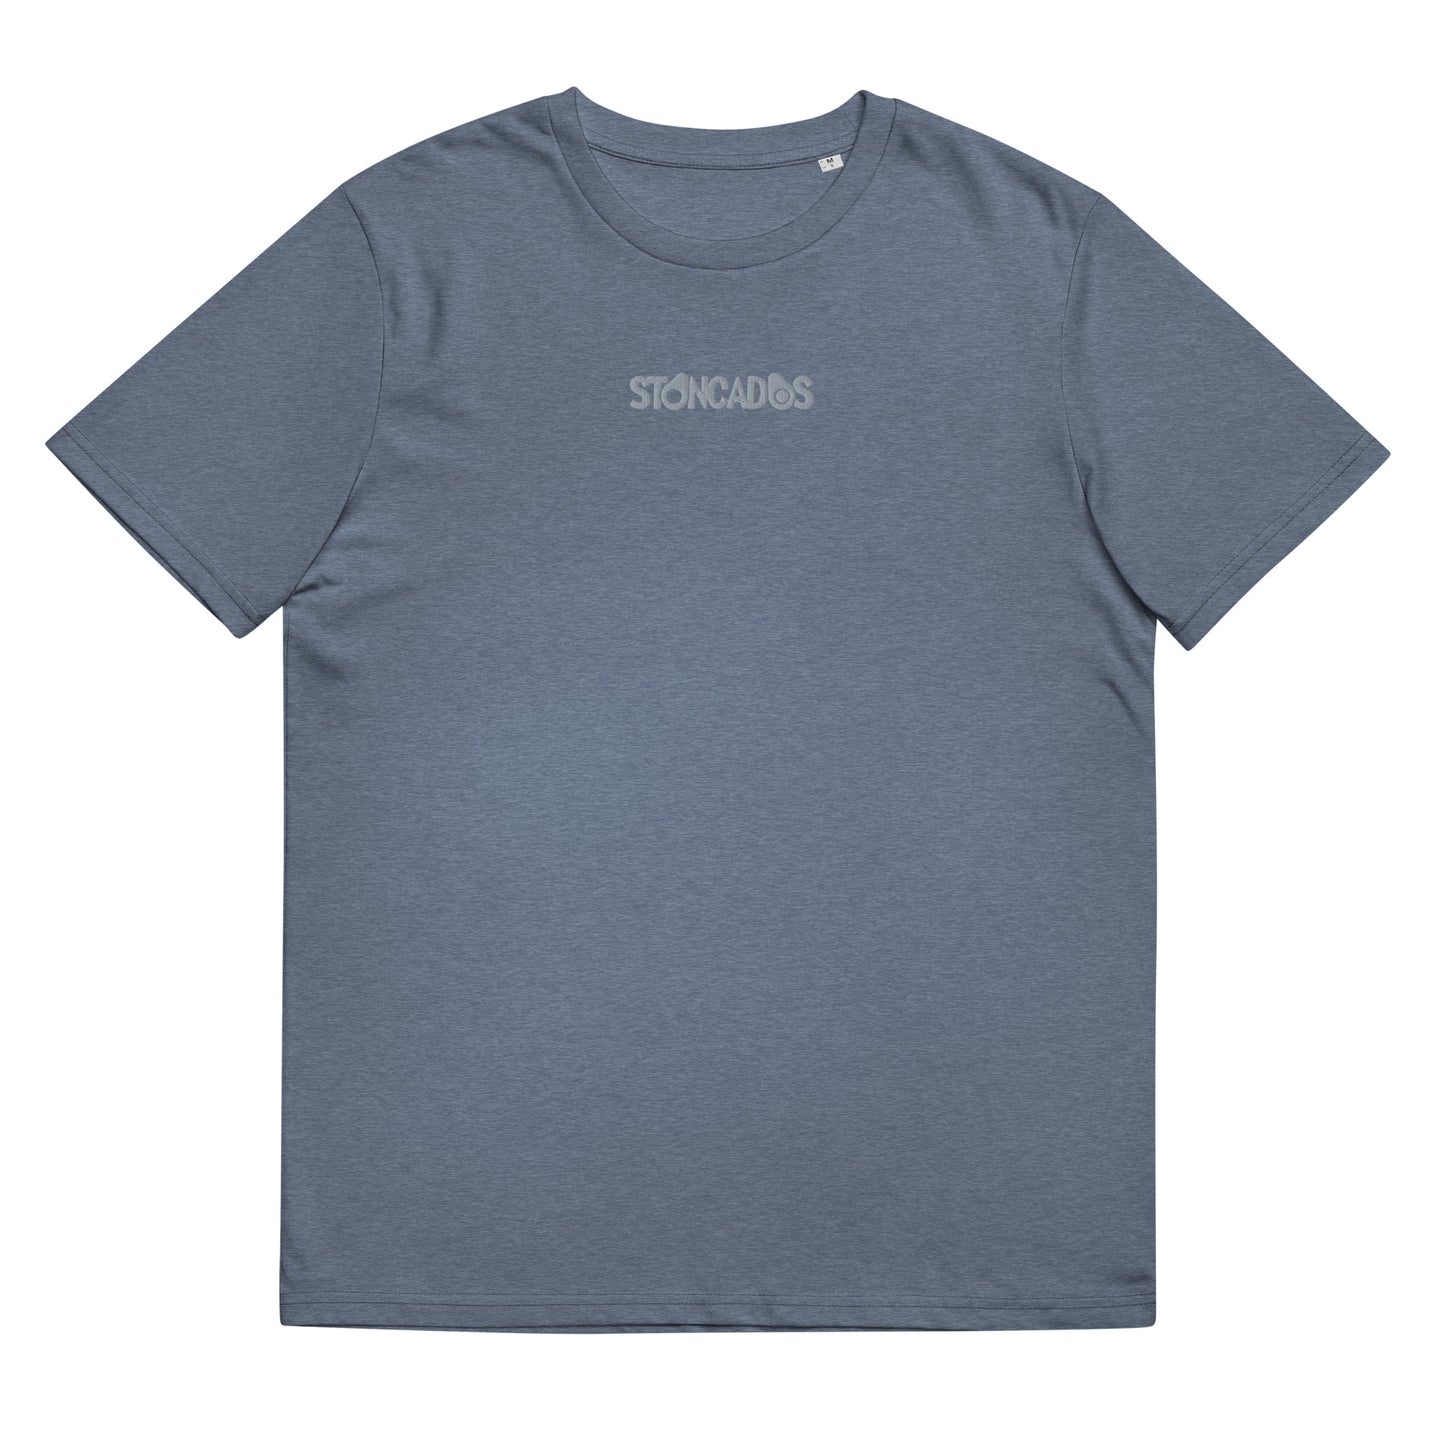 Unisex organic cotton t-shirt REAR PRINT + FRONT EMBROIDERED LOGO feat Stoncados